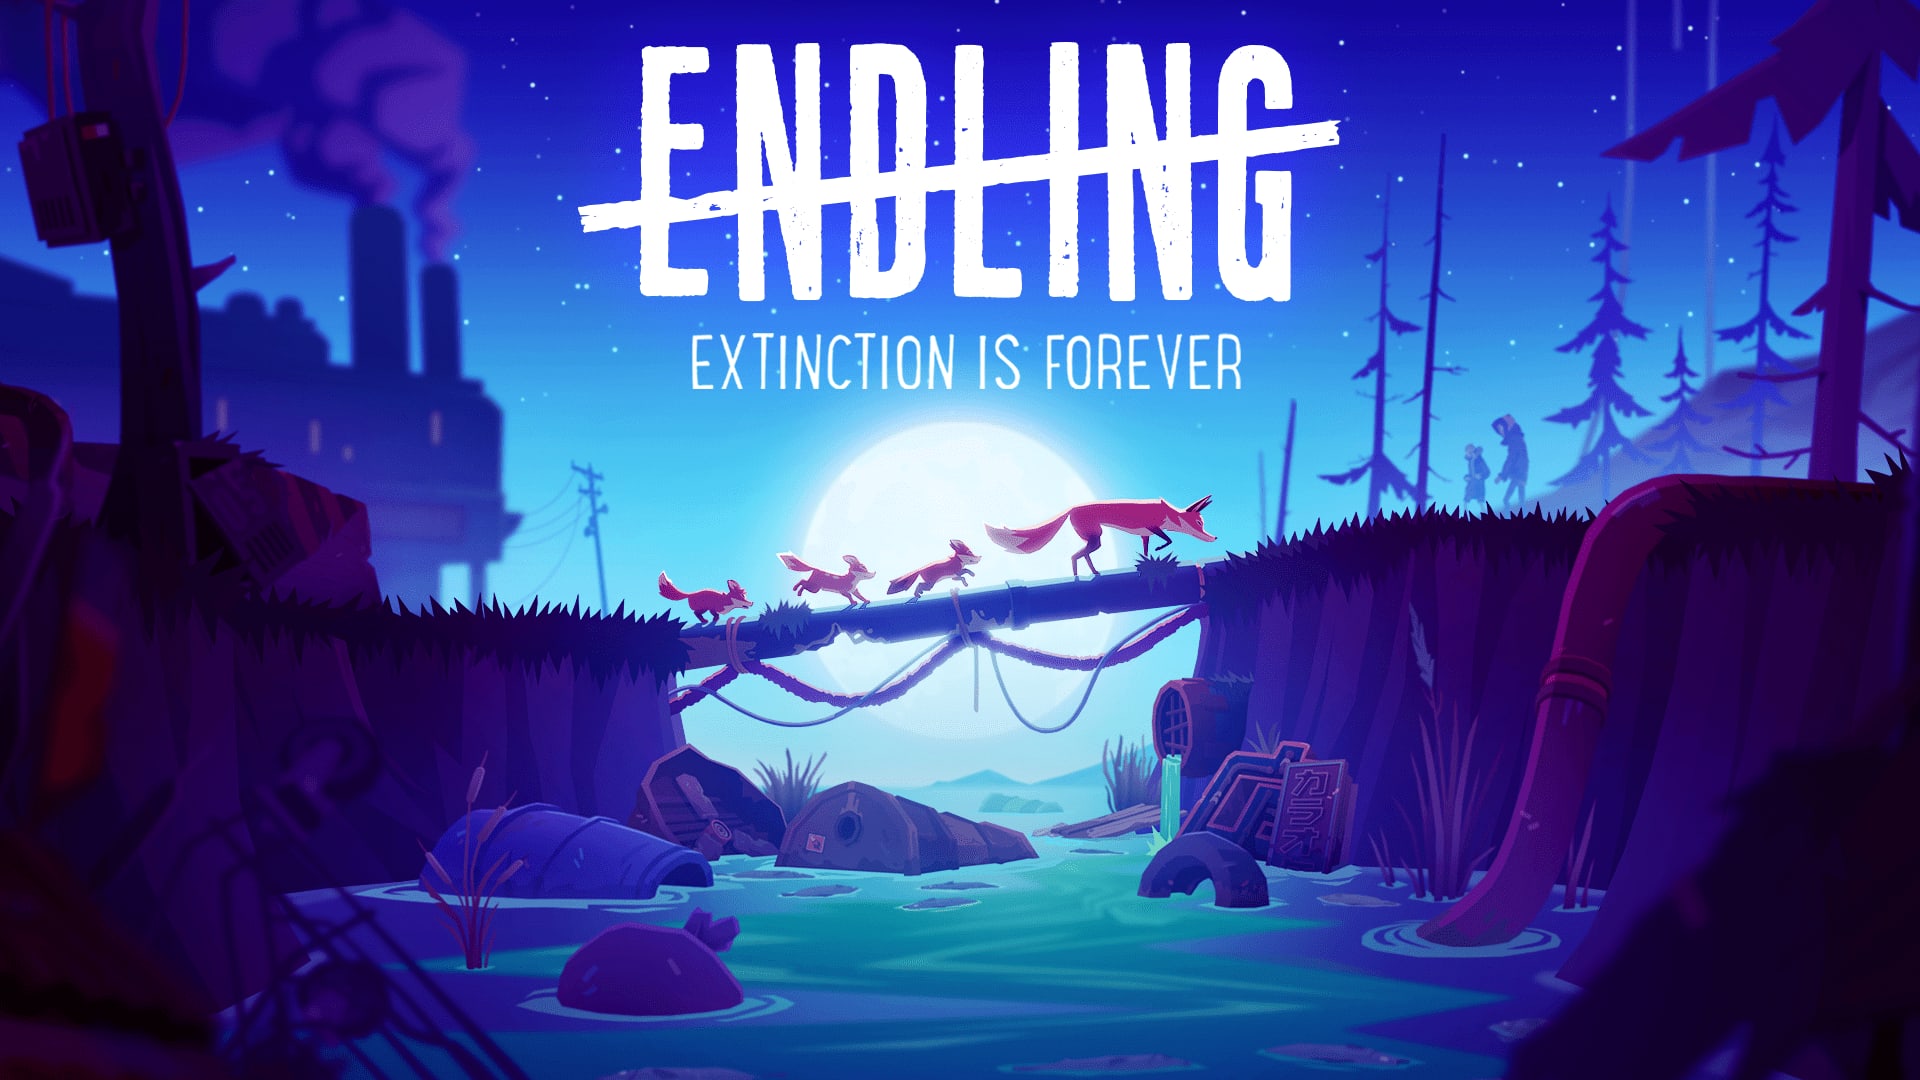 Endling is Forever Switch